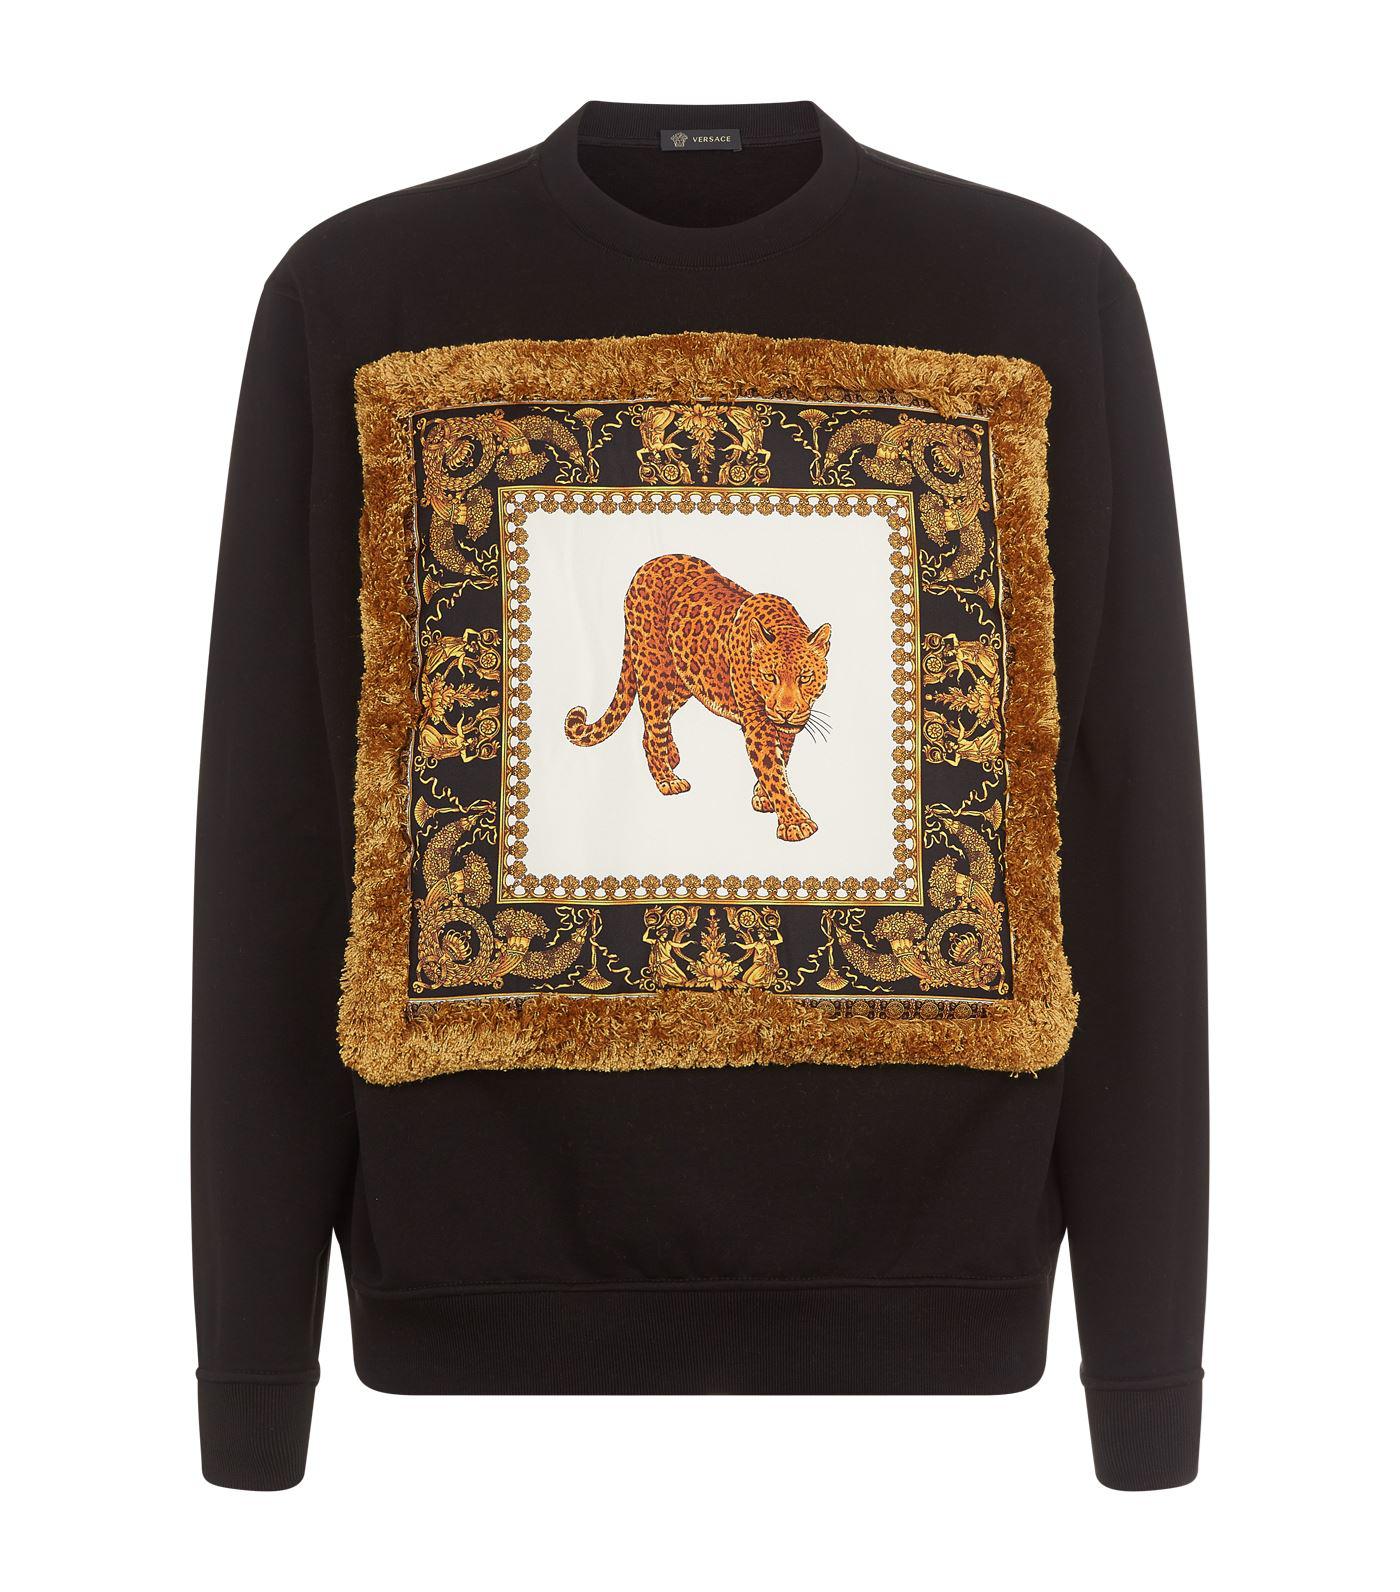 Versace Cotton Baroque Patch Sweater in Black for Men - Lyst